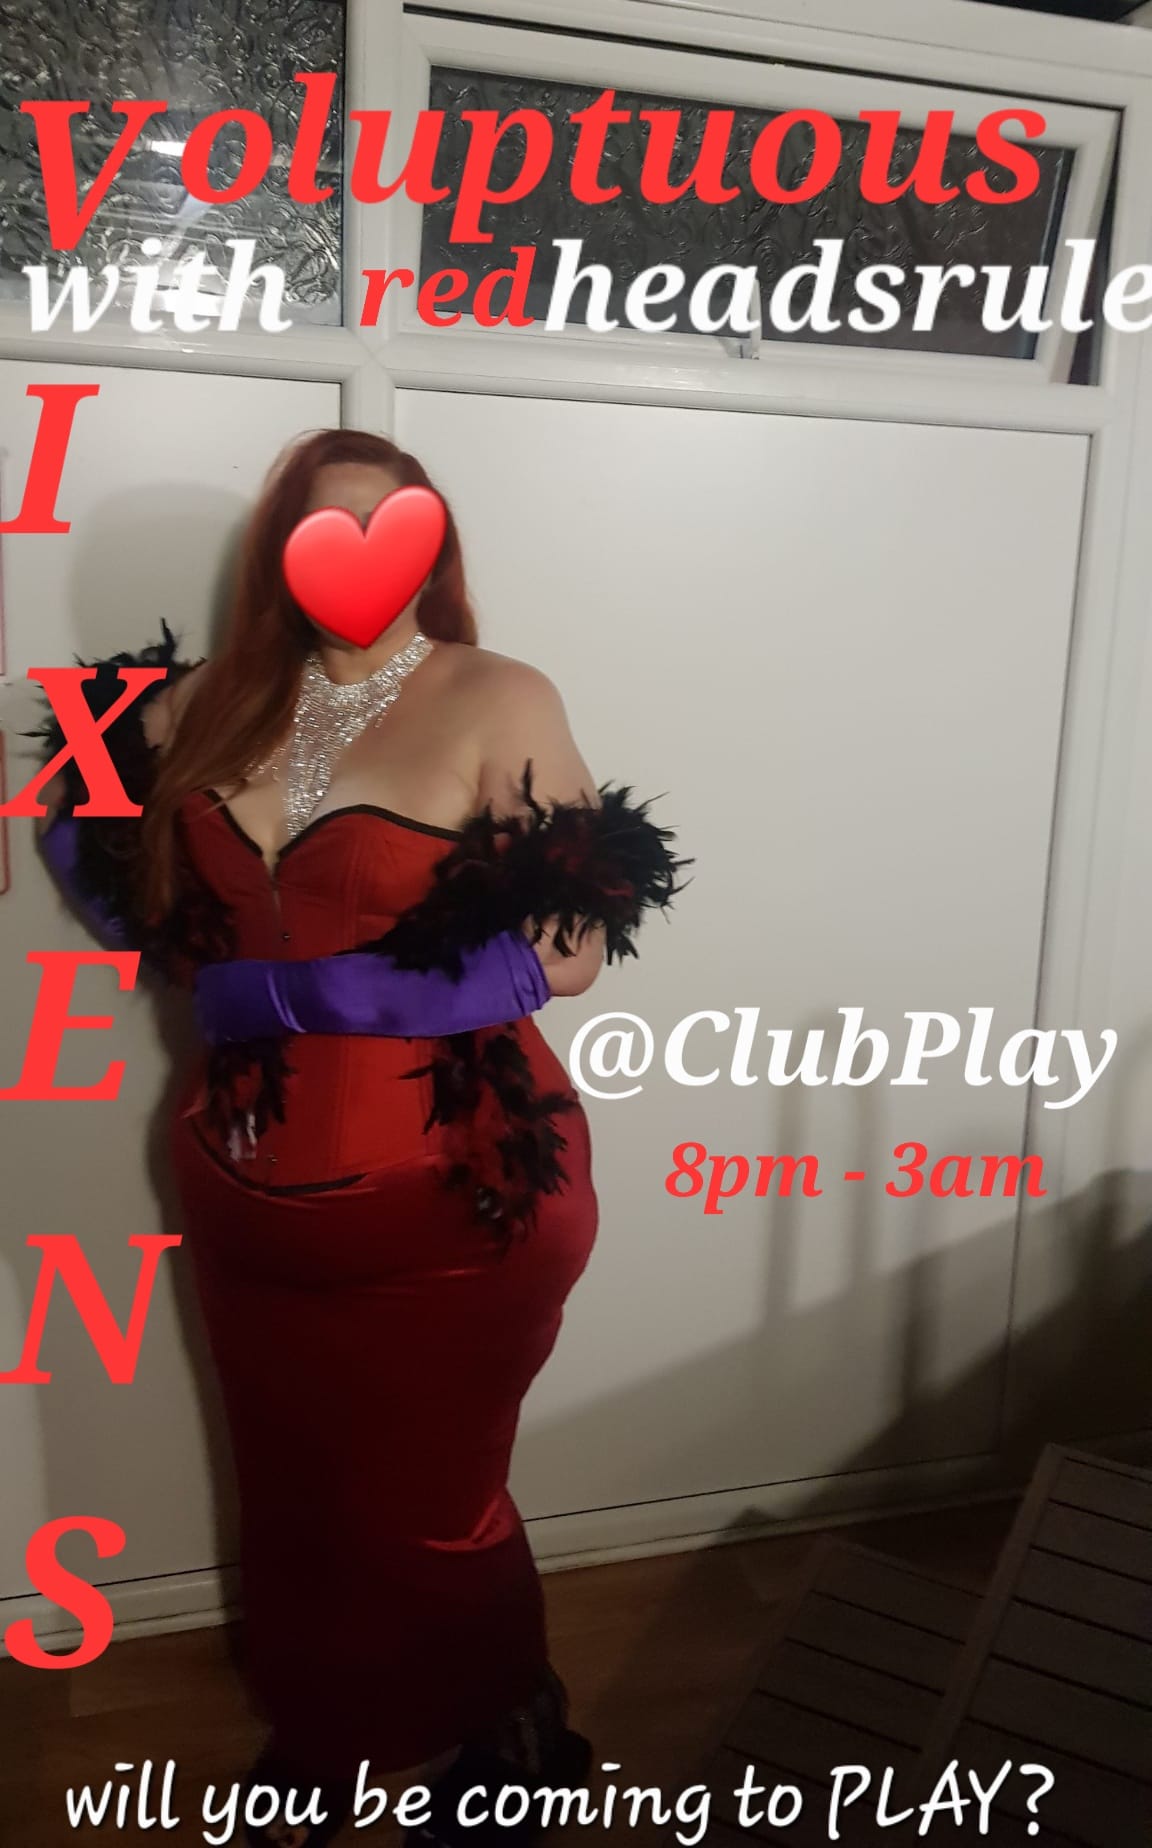 Voluptuous Vixens - Hosted by redheadsrule - Friday 10th March - Club Play Blackpool